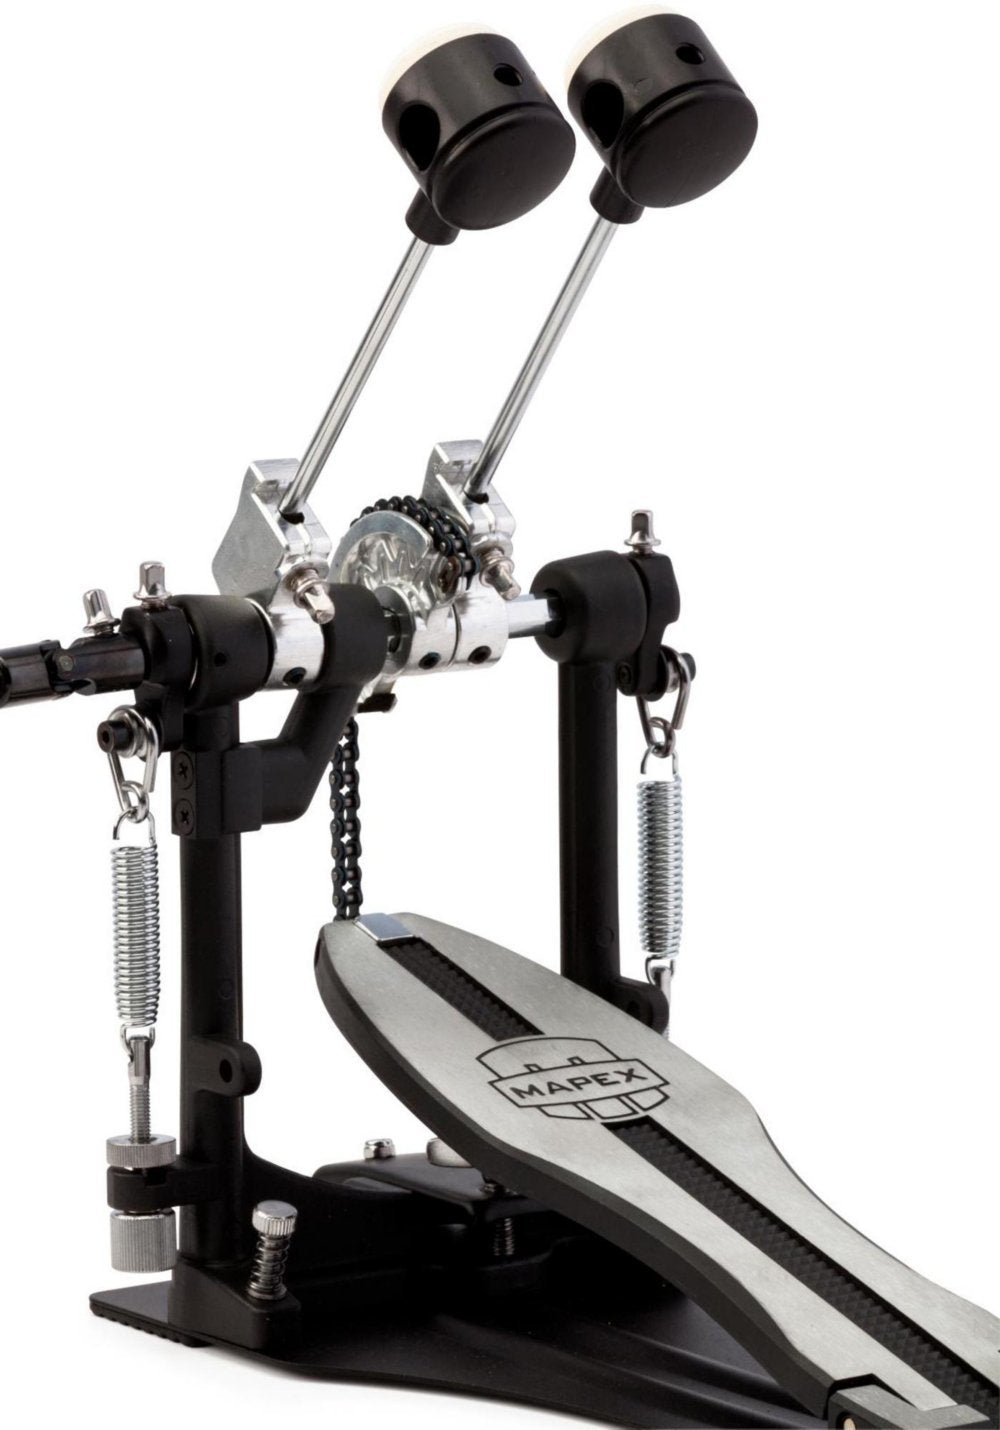 Mapex P400TW 400-Series Double Pedal